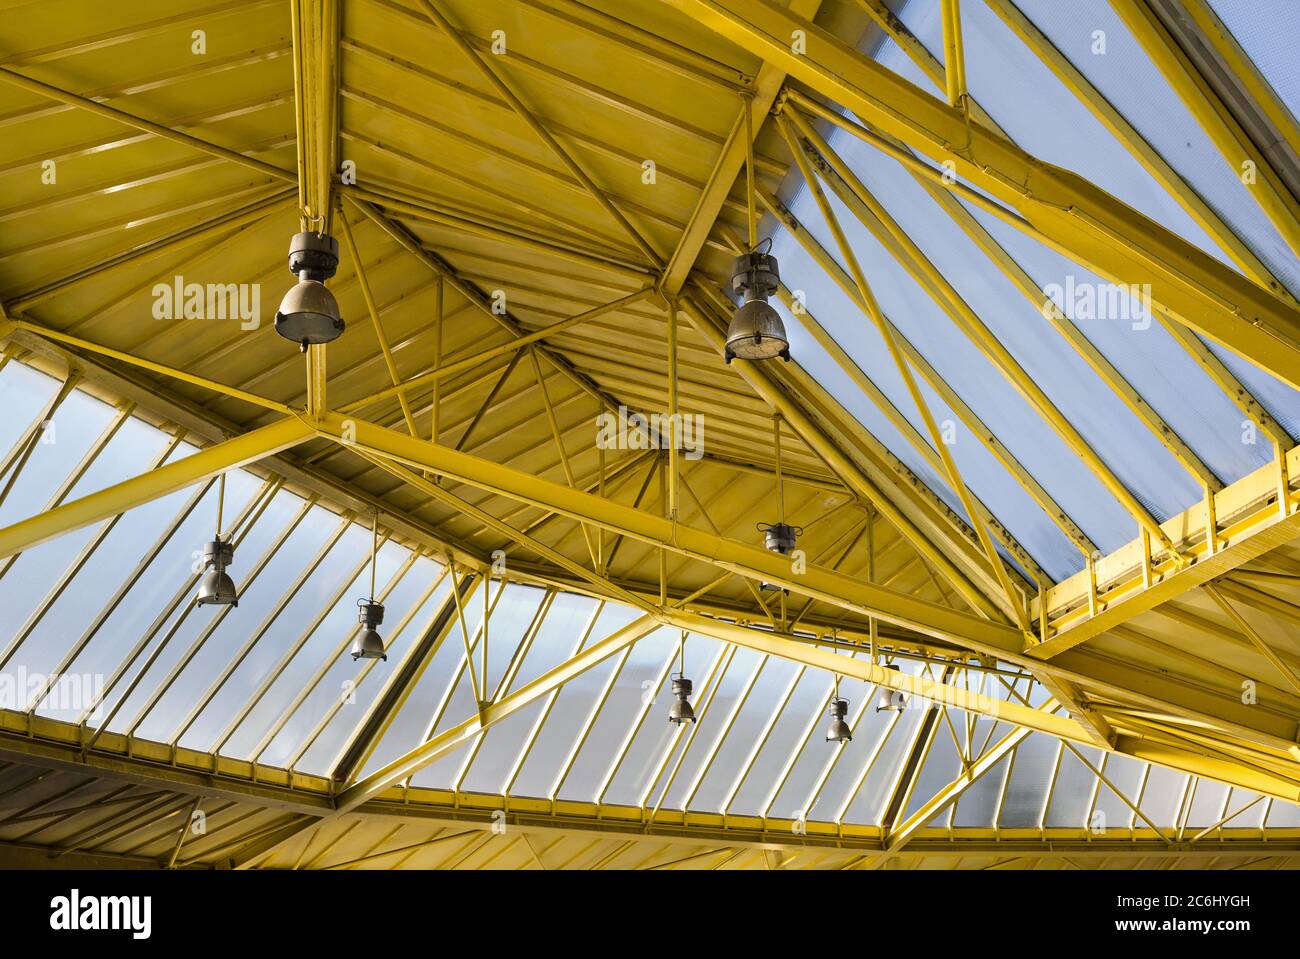 Metallic construction of ceiling and beam in factory and industrial building. Big windows and lights. Sheet metal has yellow color. Geometrical lines Stock Photo